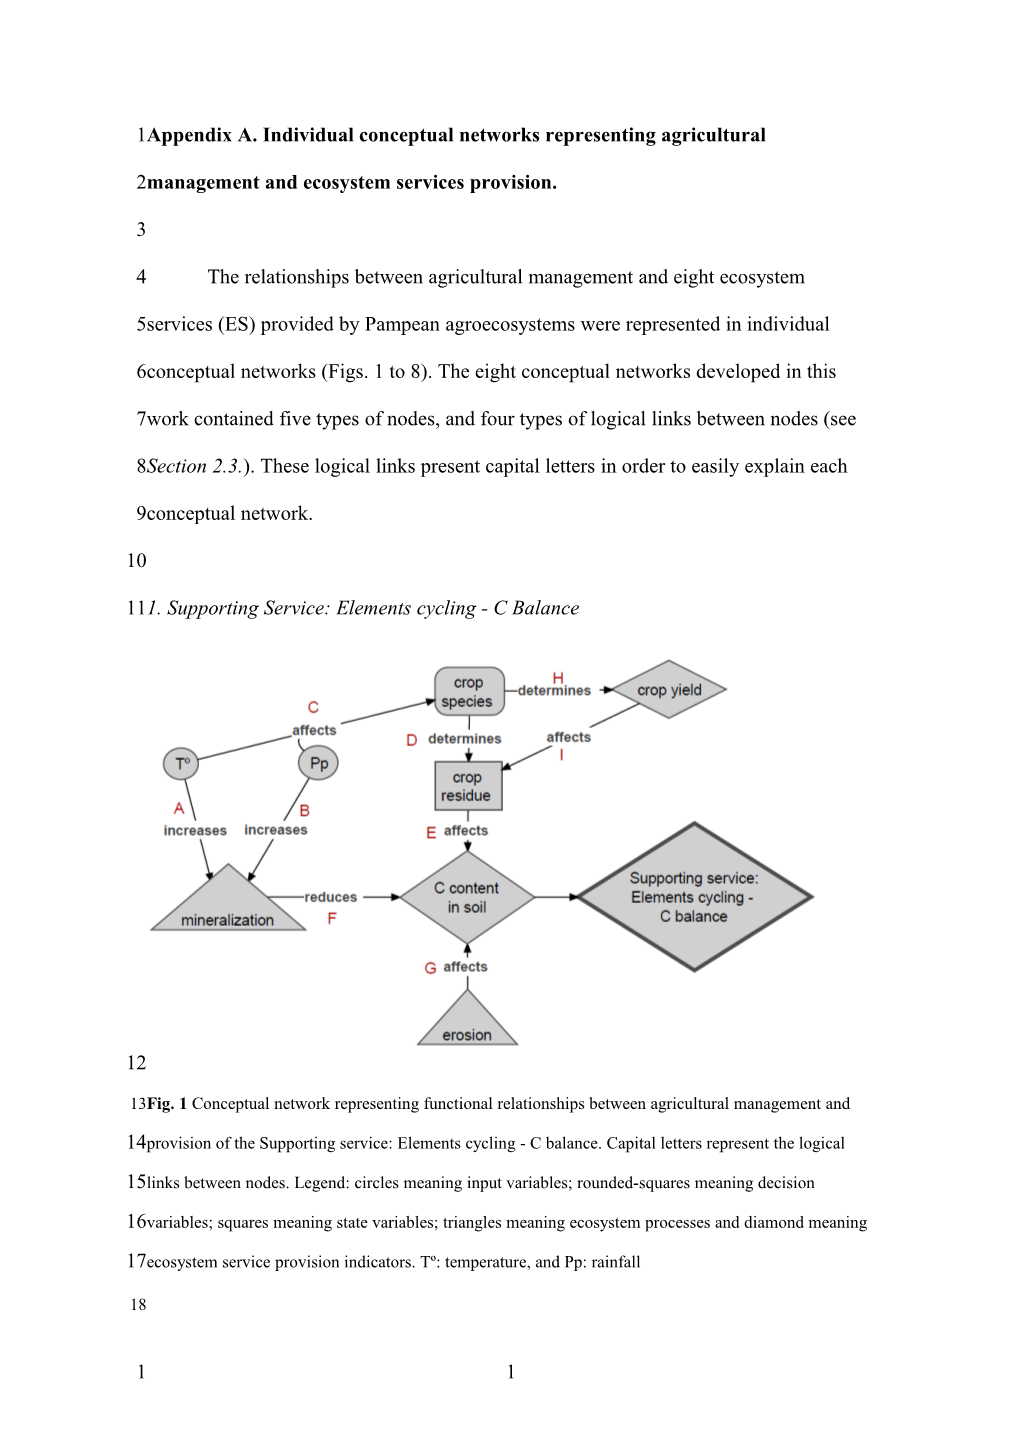 Appendix A. Individual Conceptual Networks Representing Agricultural Management and Ecosystem